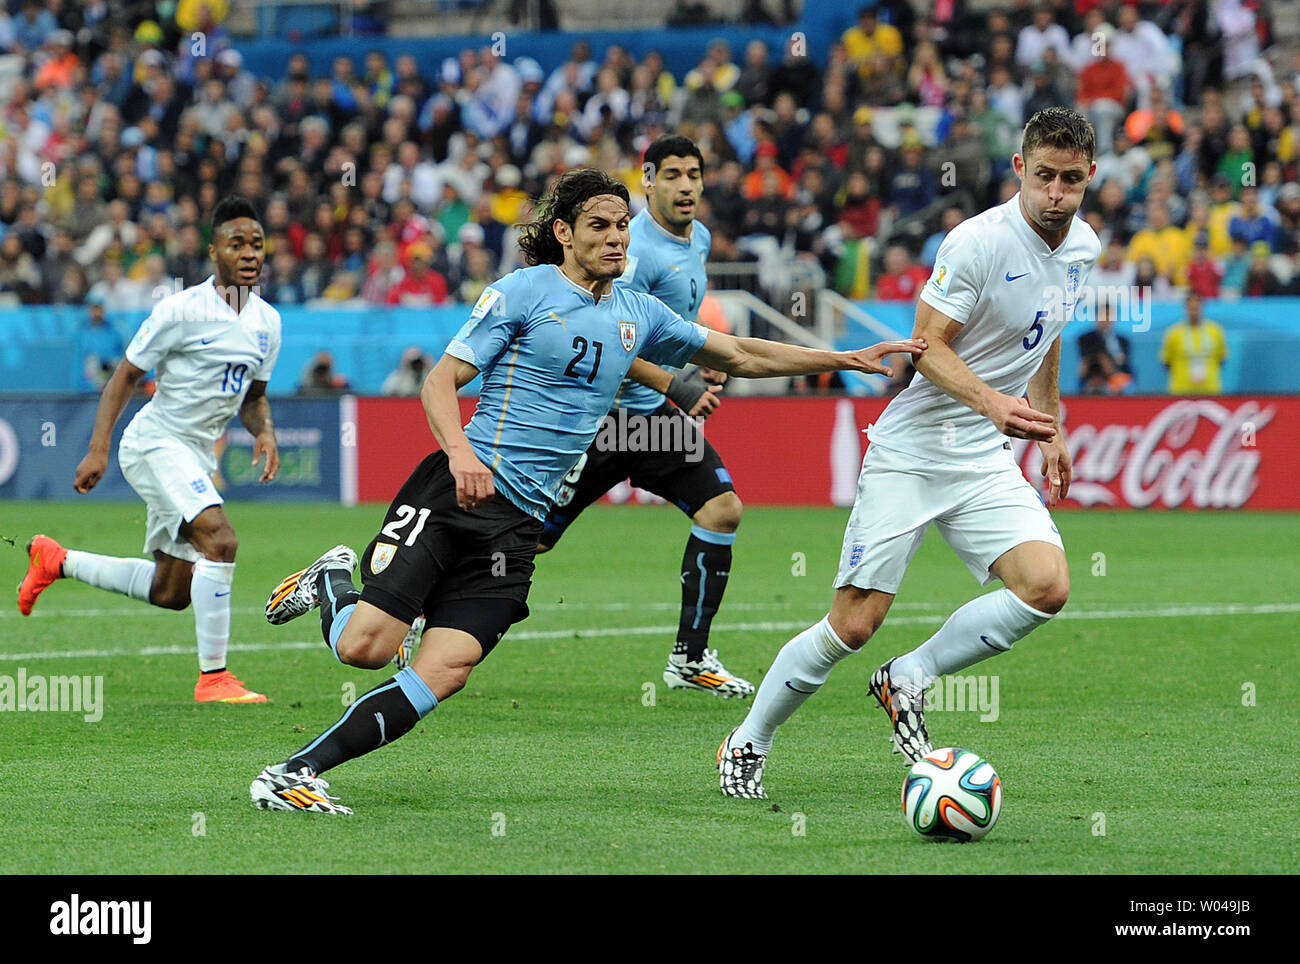 Edinson Cavani (L) of Uruguay competes with Gary Cahill of England during the 2014 FIFA World Cup Group D match at the Arena Corinthians in Sao Paulo, Brazil on June 19, 2014. UPI/Chris Brunskill Stock Photo